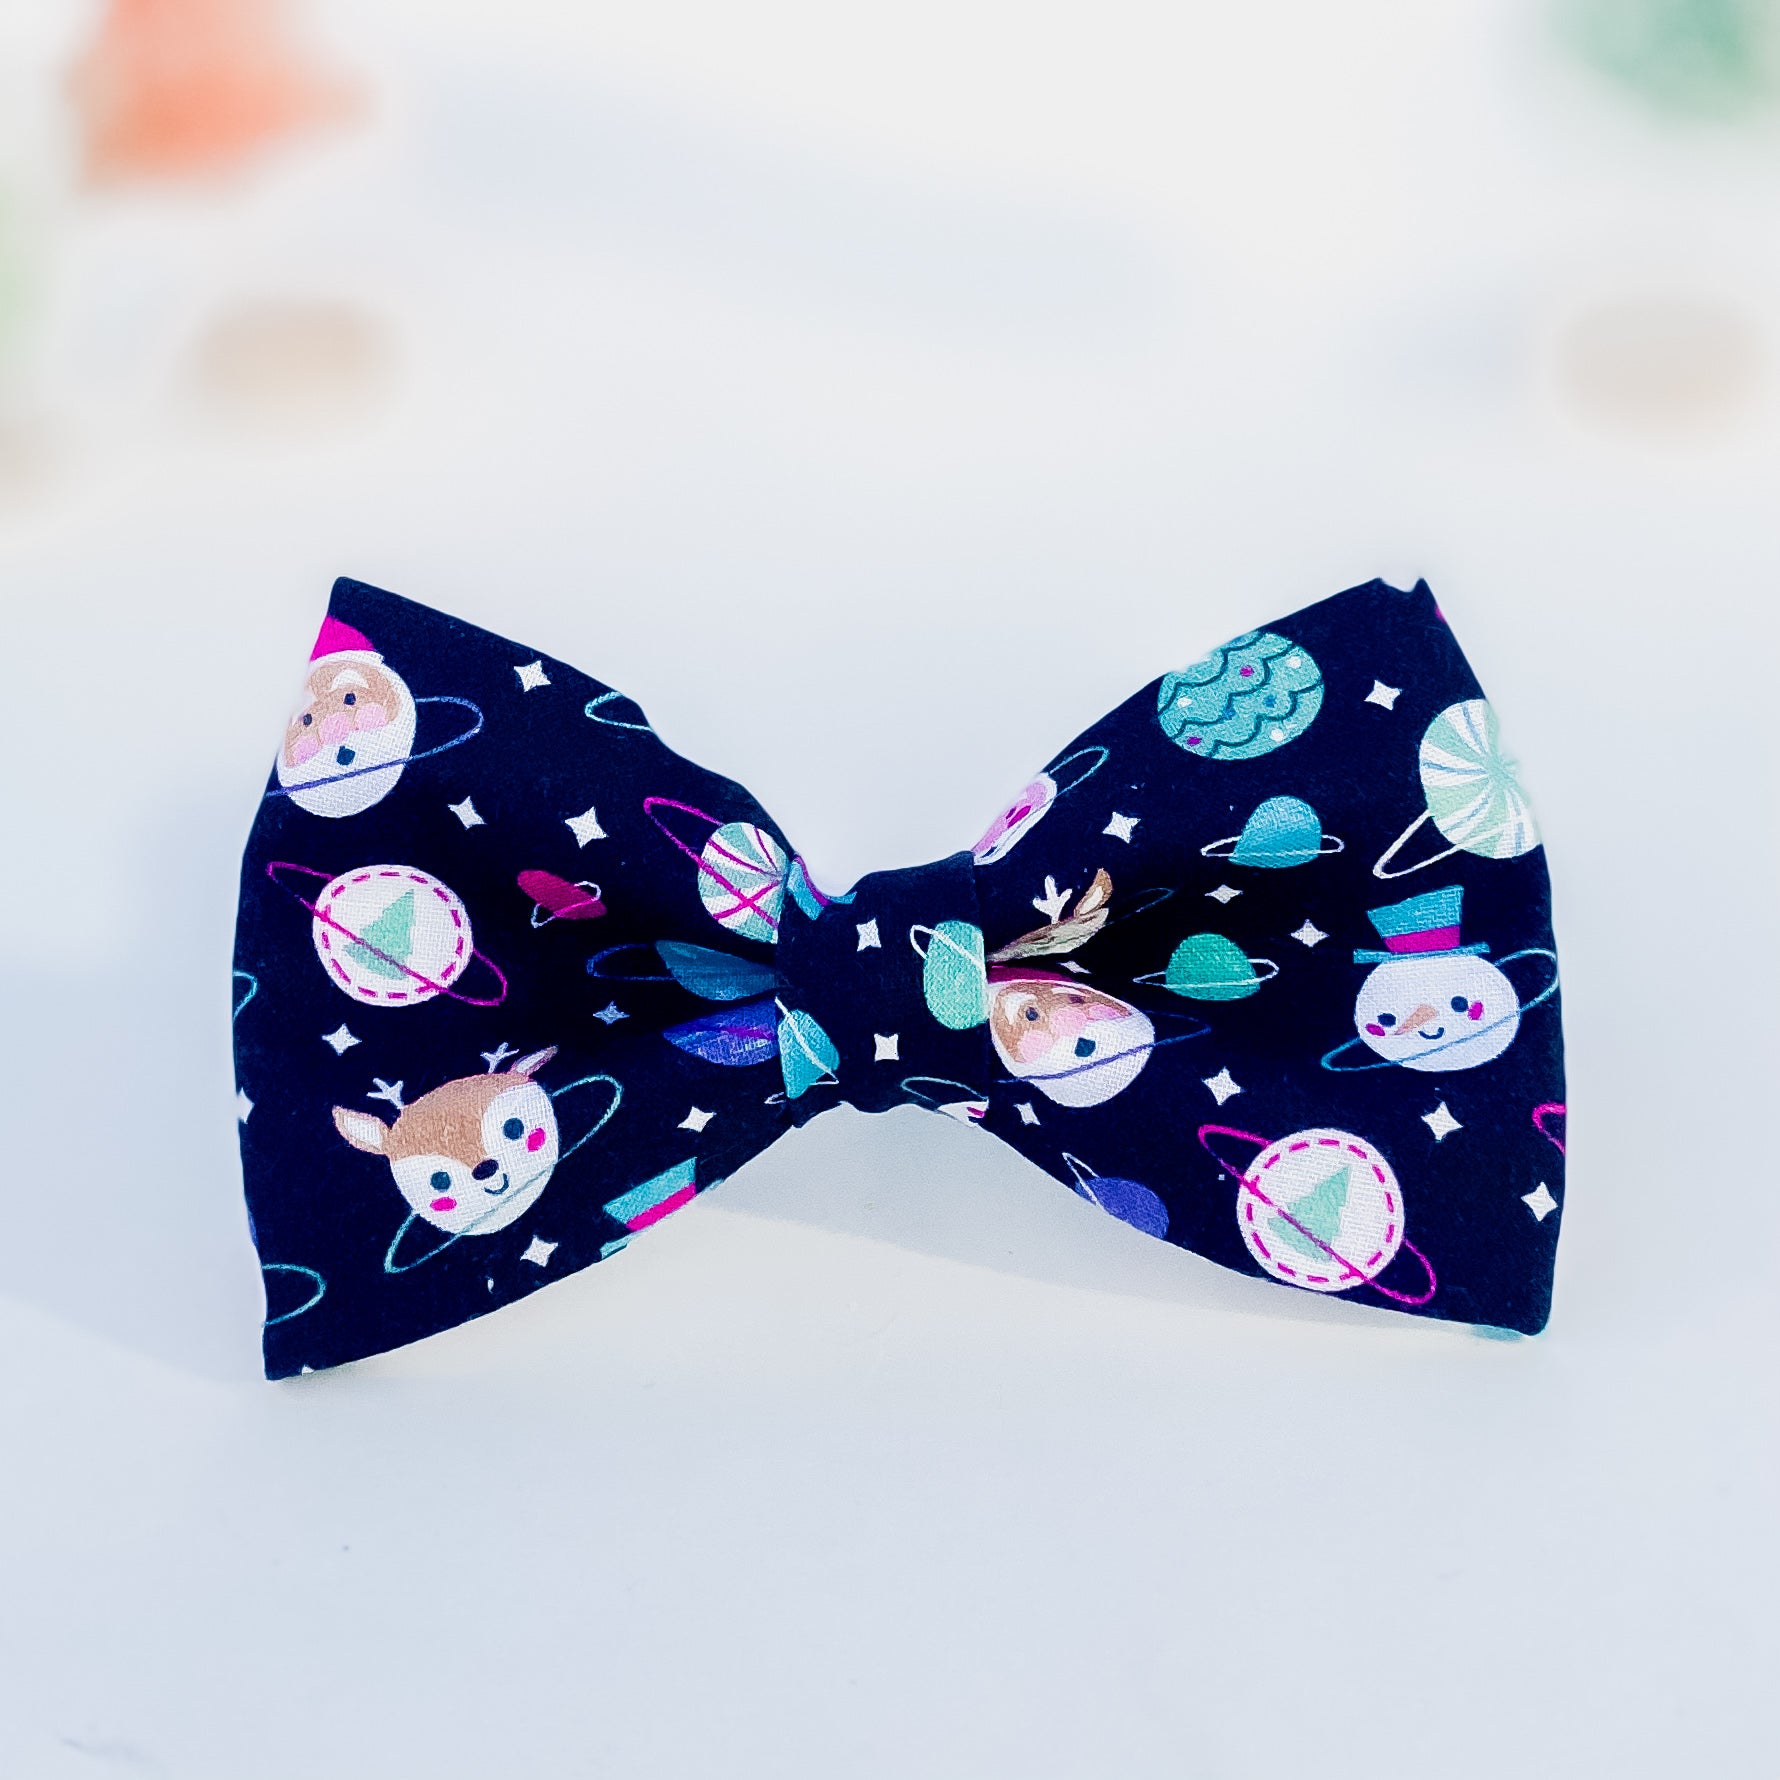 Joy to the Universe Christmas dog bow tie pet accessory